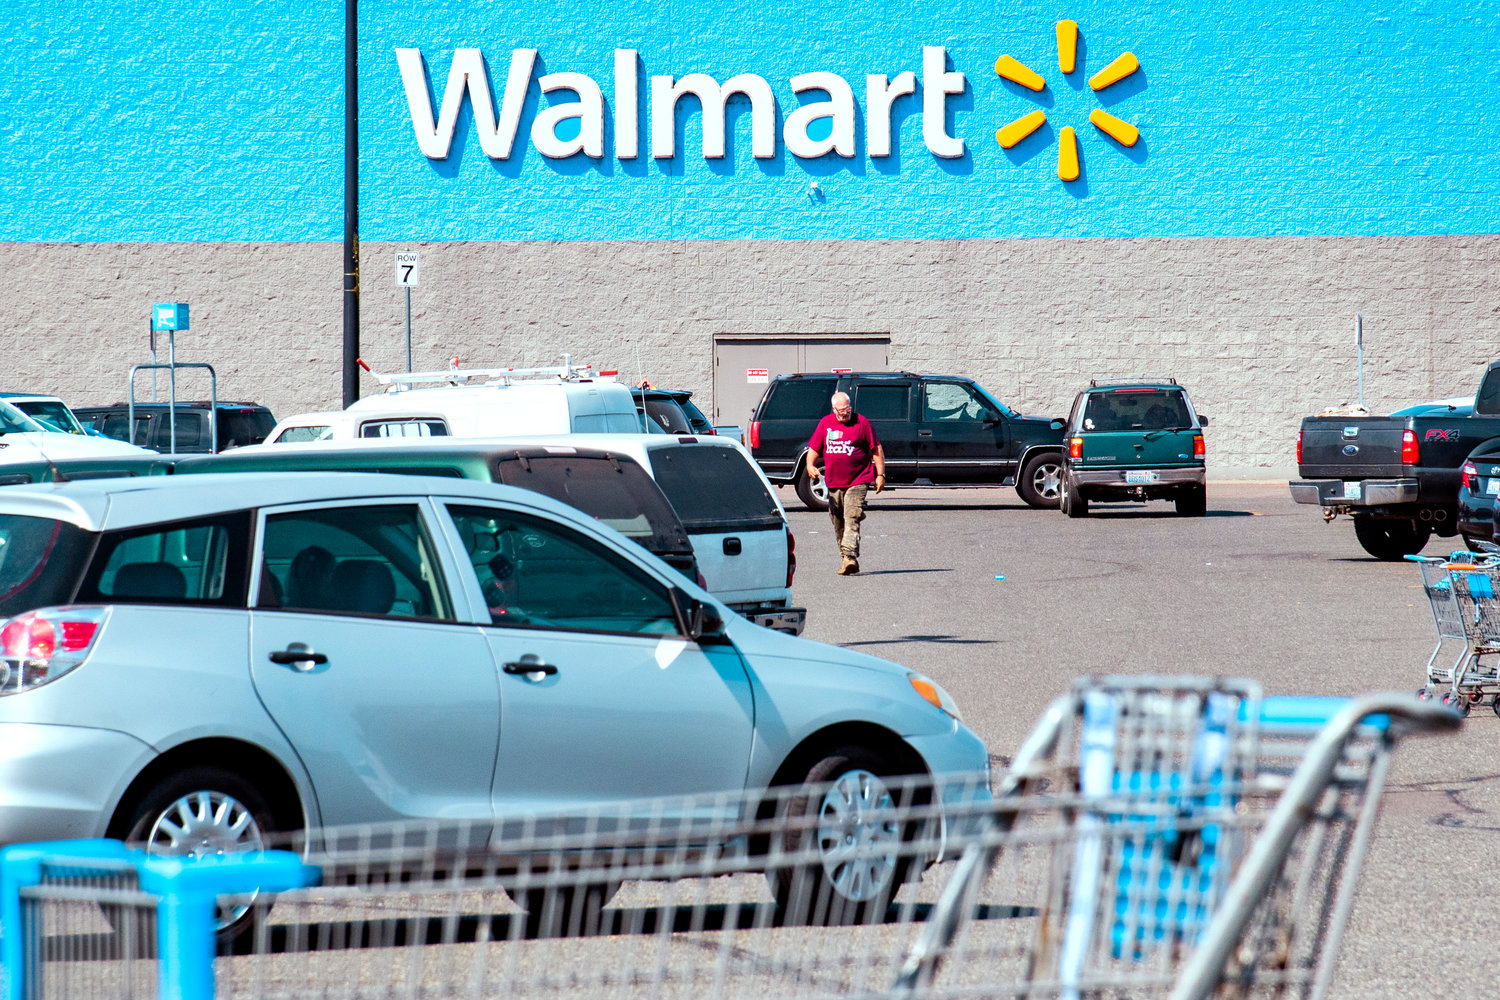 Walmart, located at 1601 NW Louisiana Avenue in Chehalis, is seen on a sunny Tuesday afternoon.